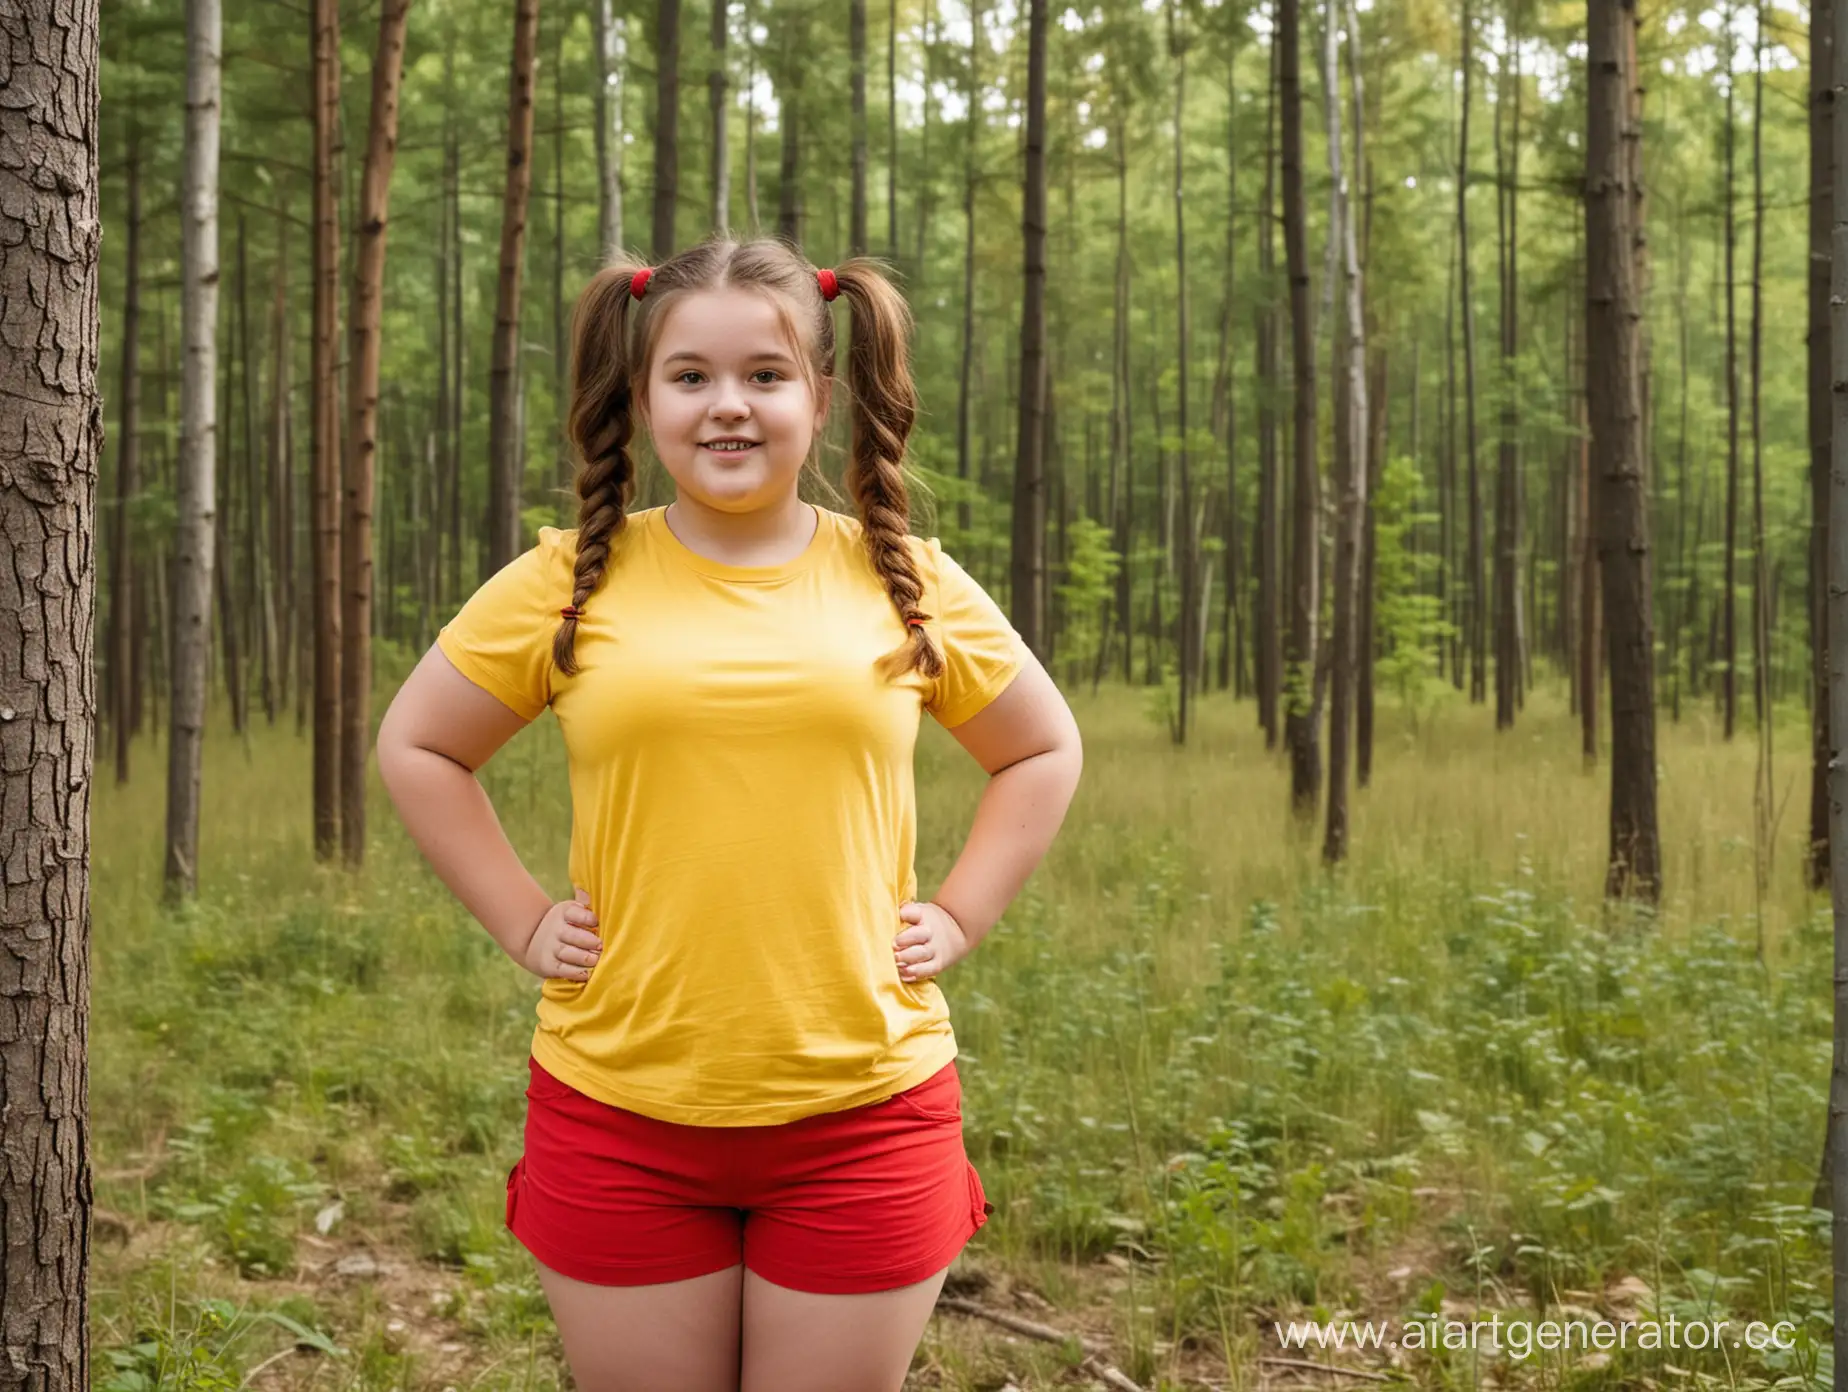 Adorable-Chubby-Girl-with-Pigtails-in-Forest-Setting